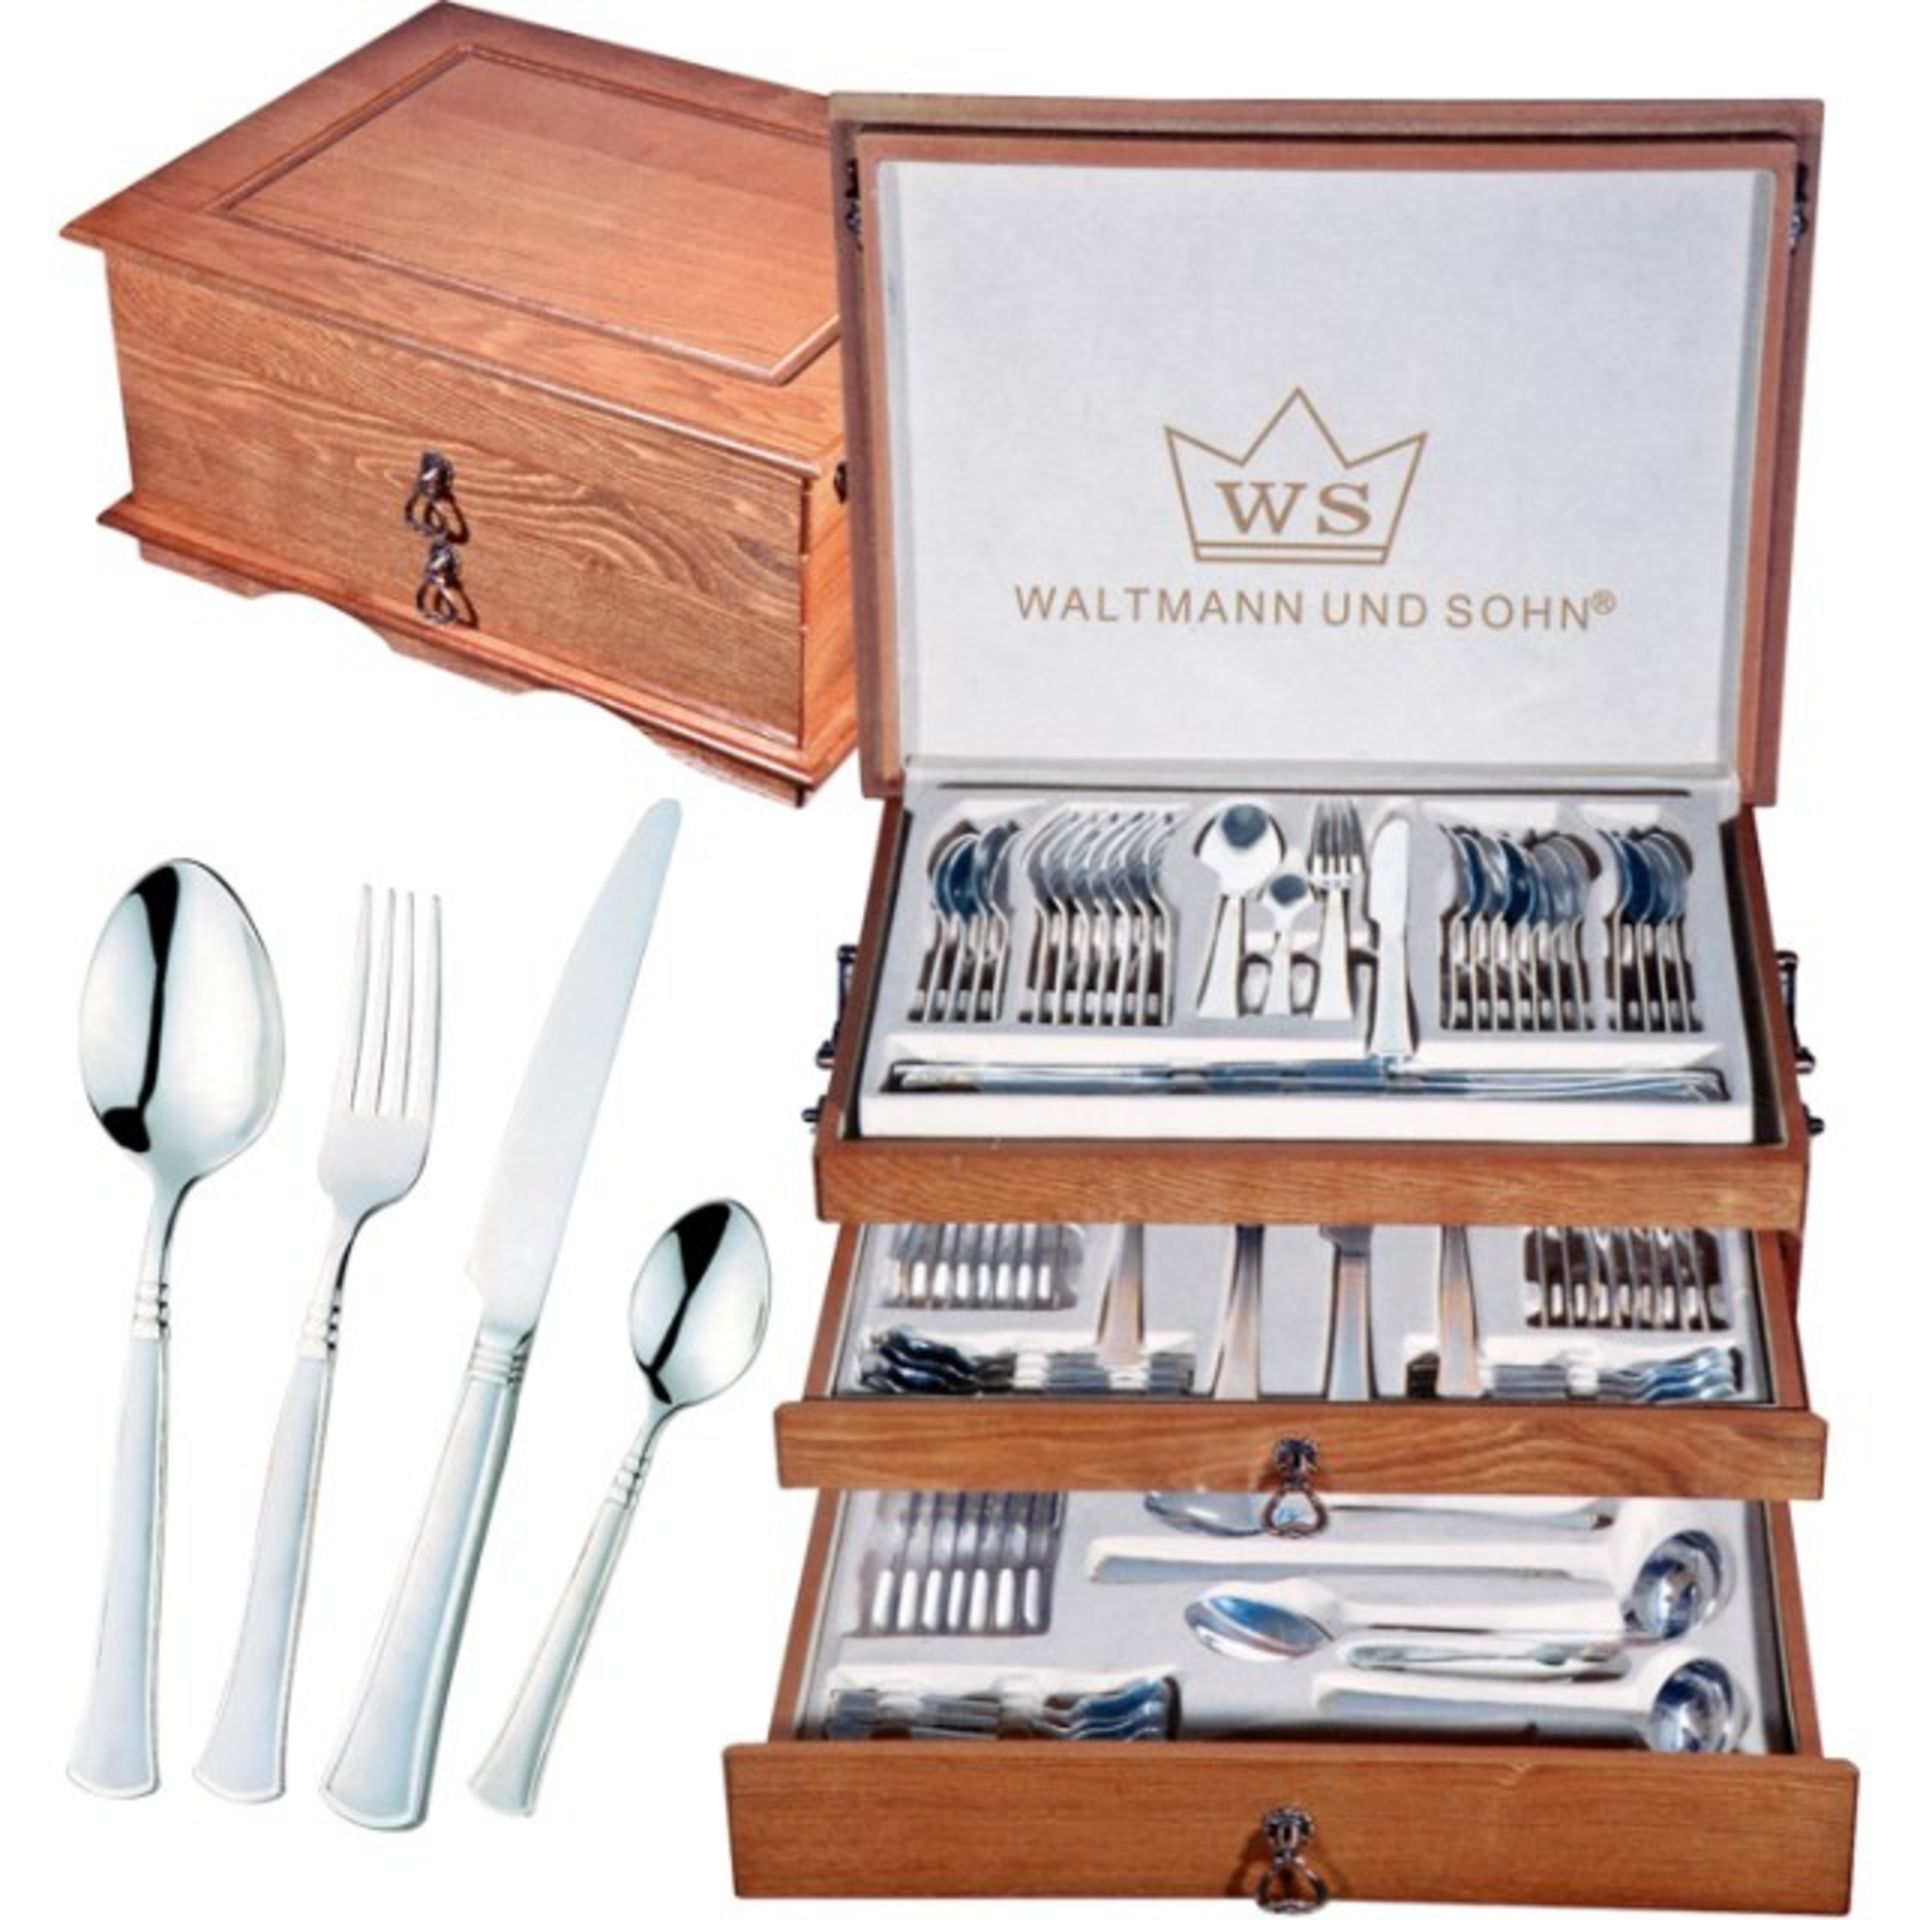 V *TRADE QTY* Brand New Canteen of Cutlery set in wooden case with two drawers containing 87 pcs